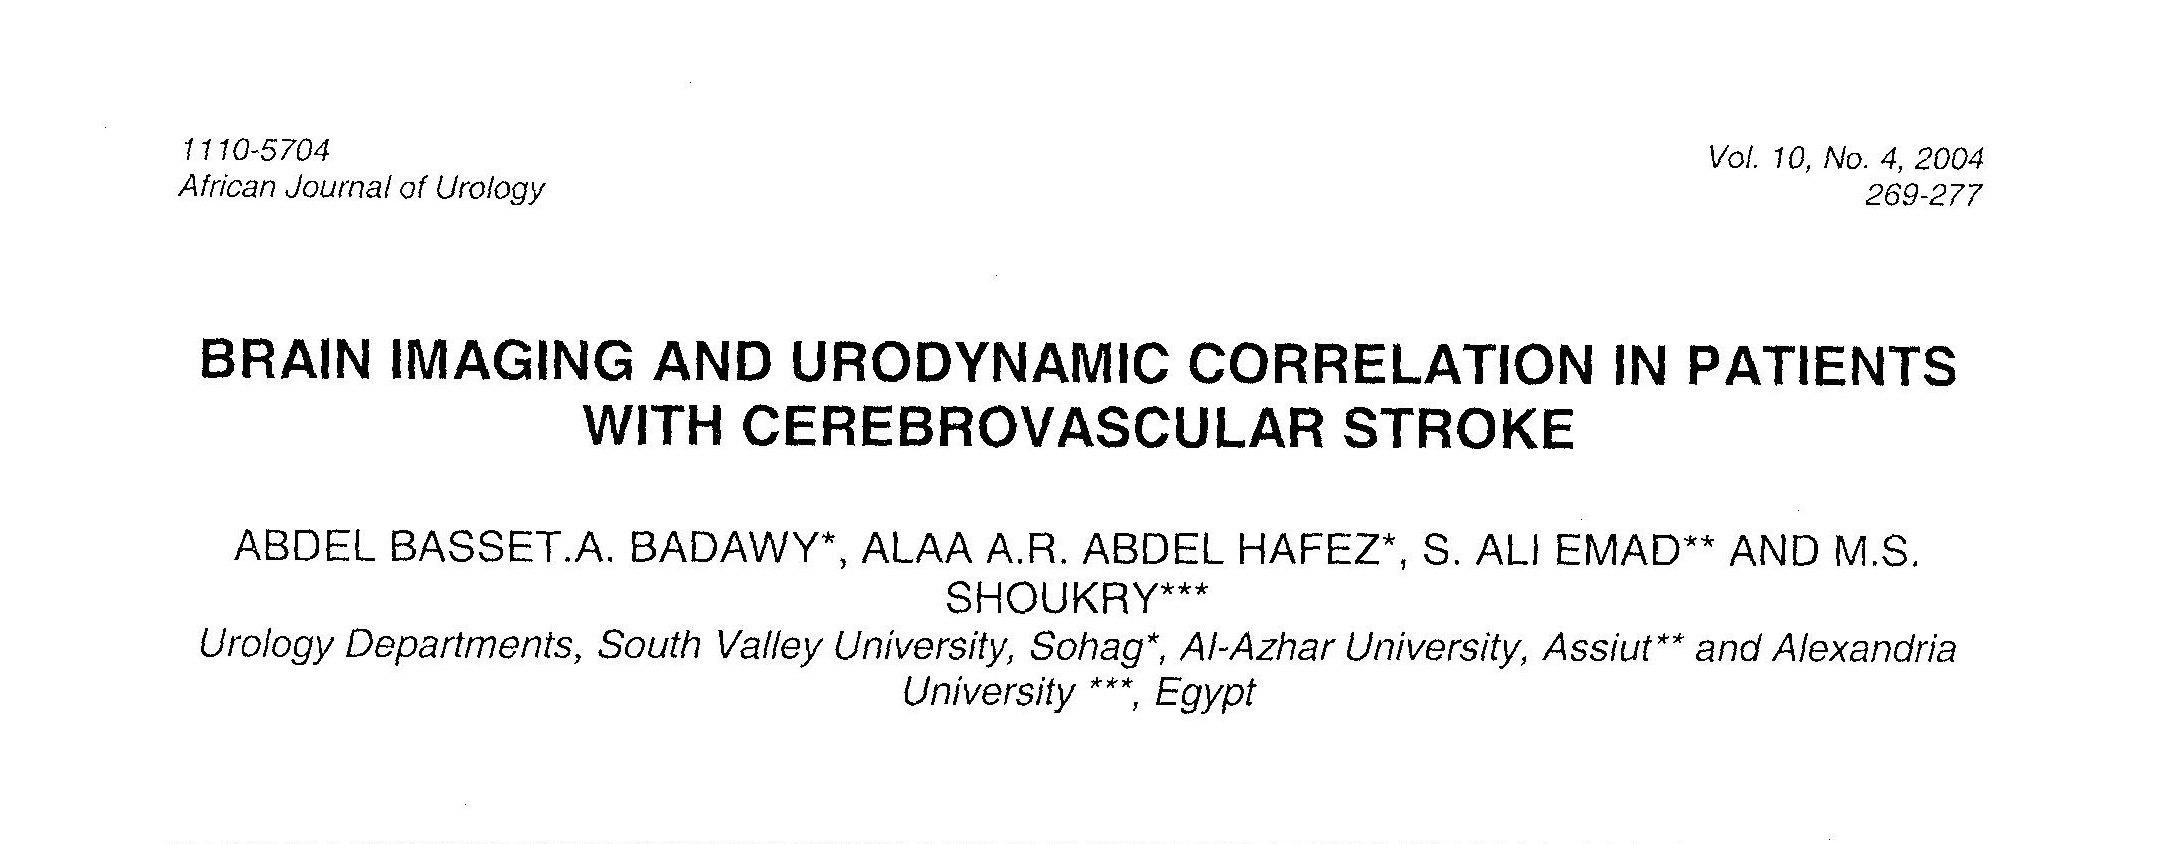 Brain Imaging and Urodynamic Correlation in Patients with Cerebrovascular Stroke